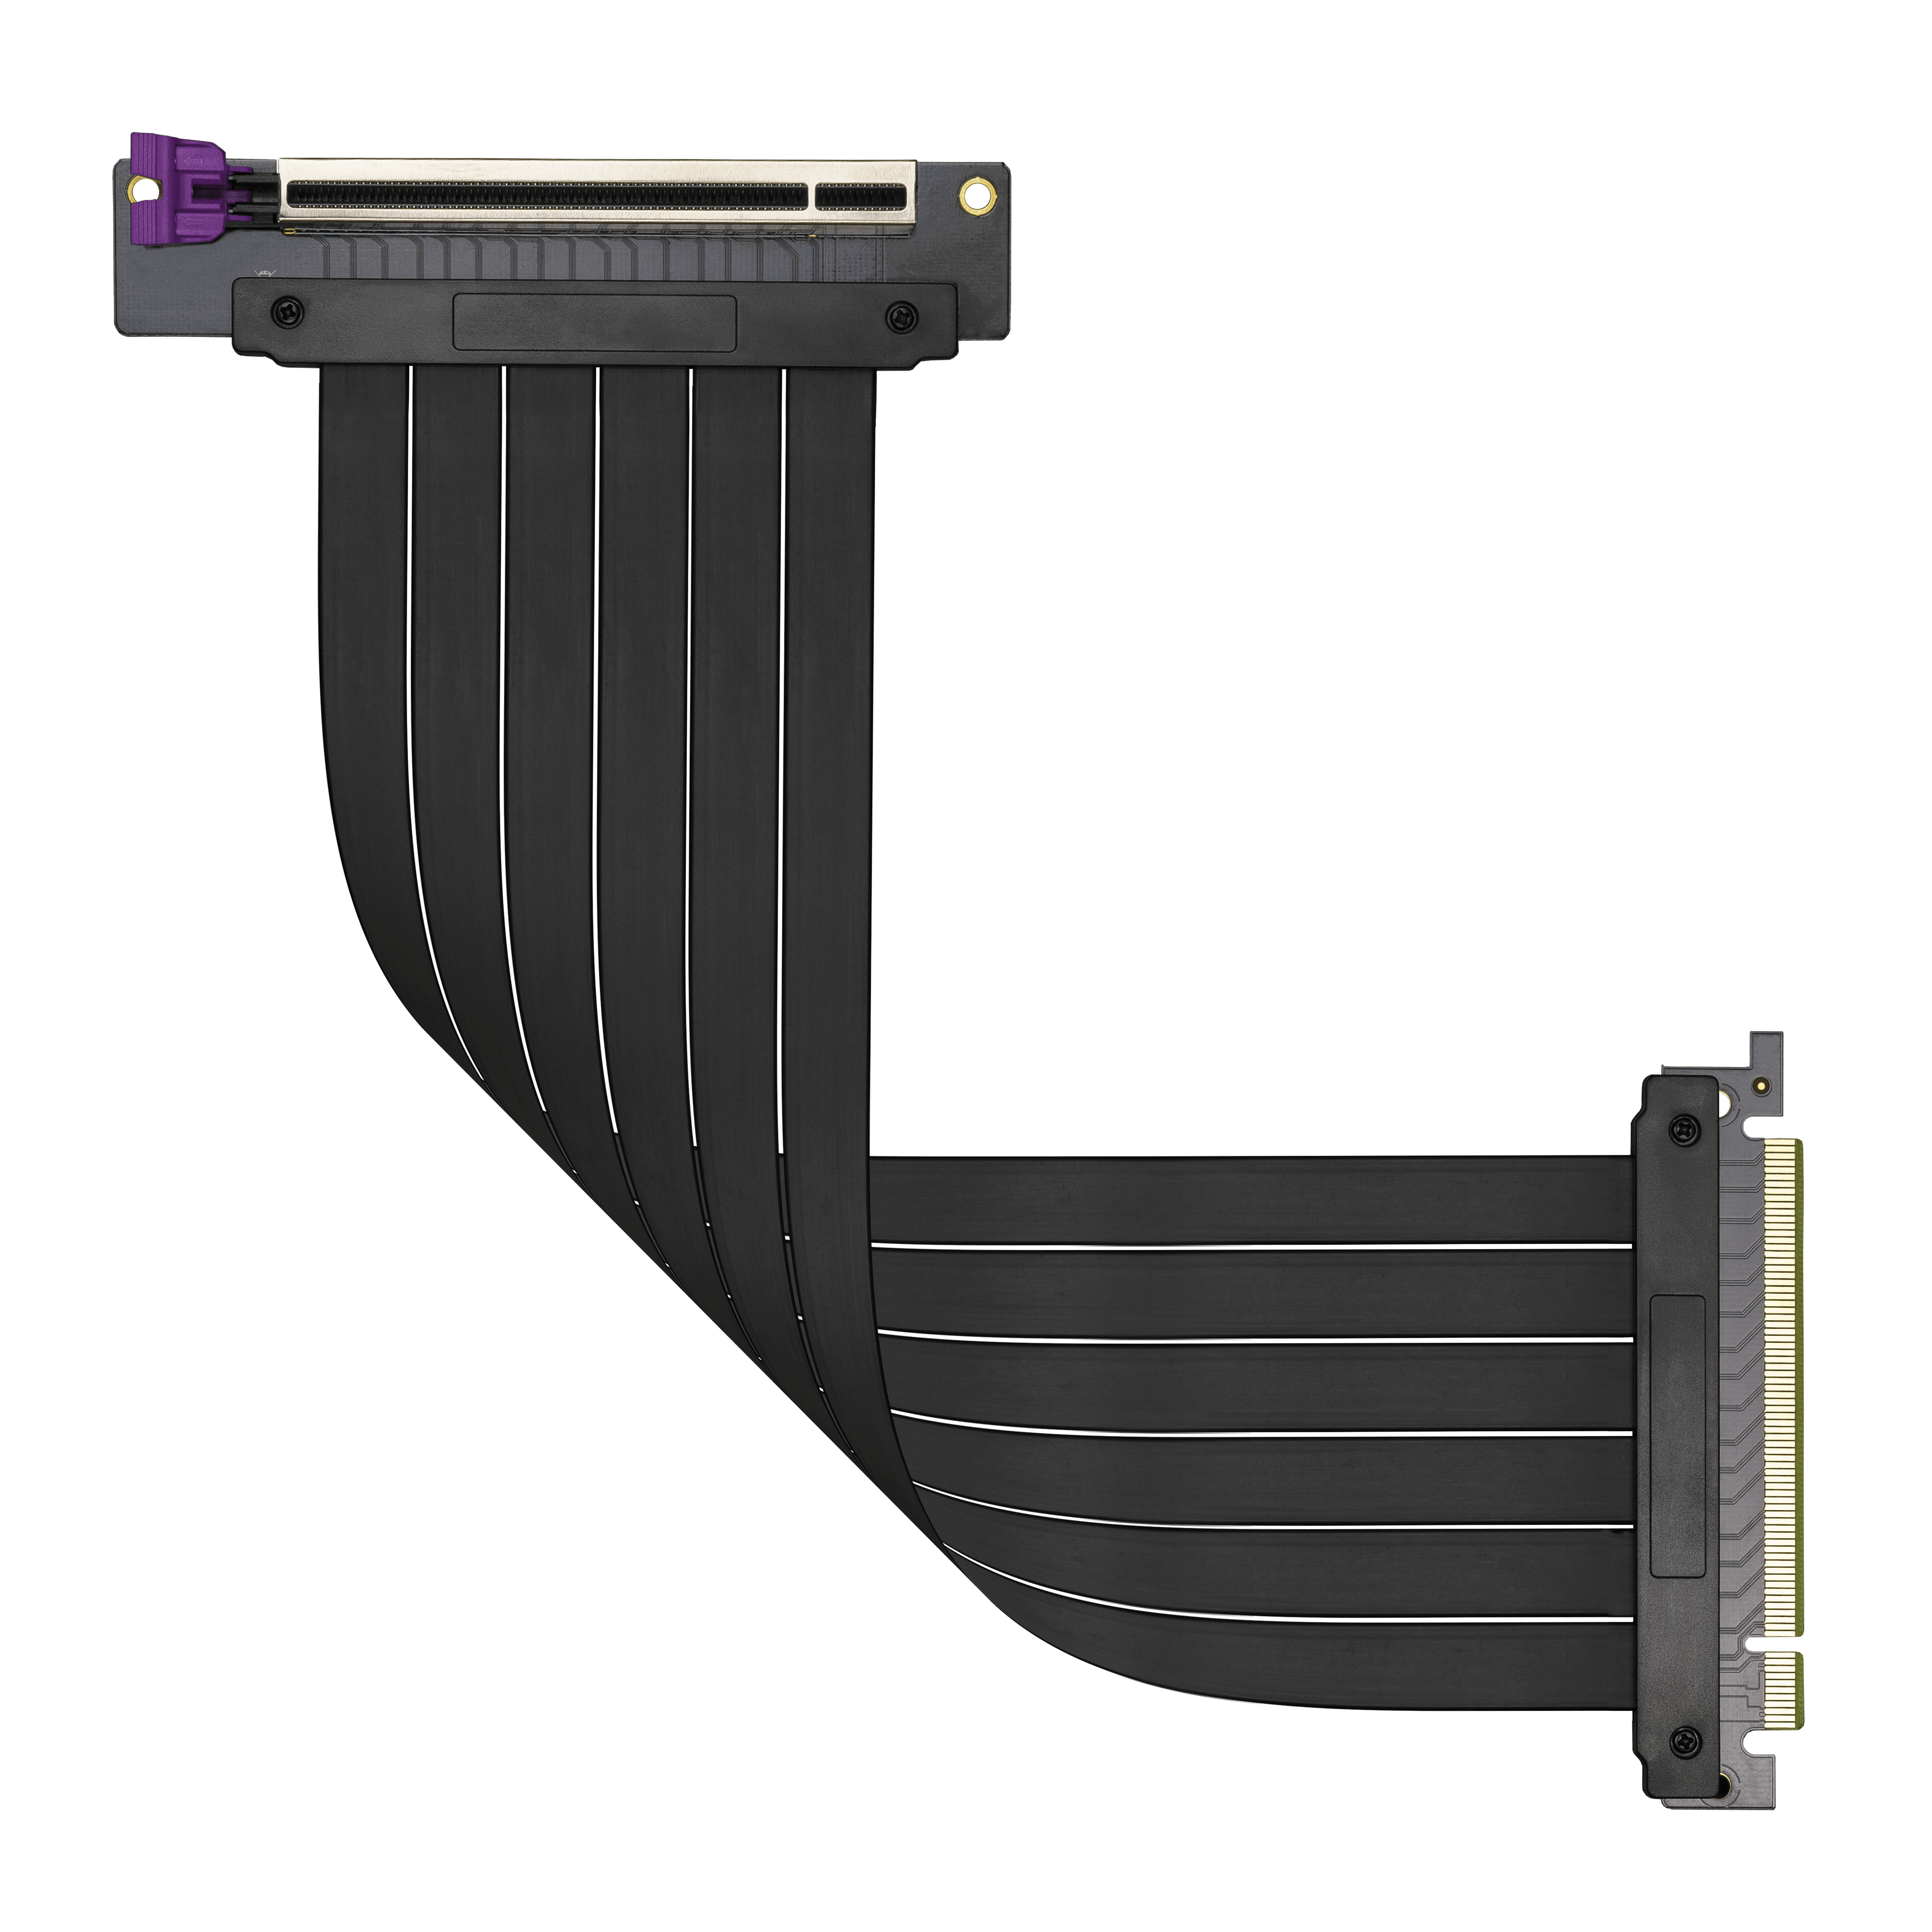 Cable PCIE X16 VER. 2 300MM Cooler Master